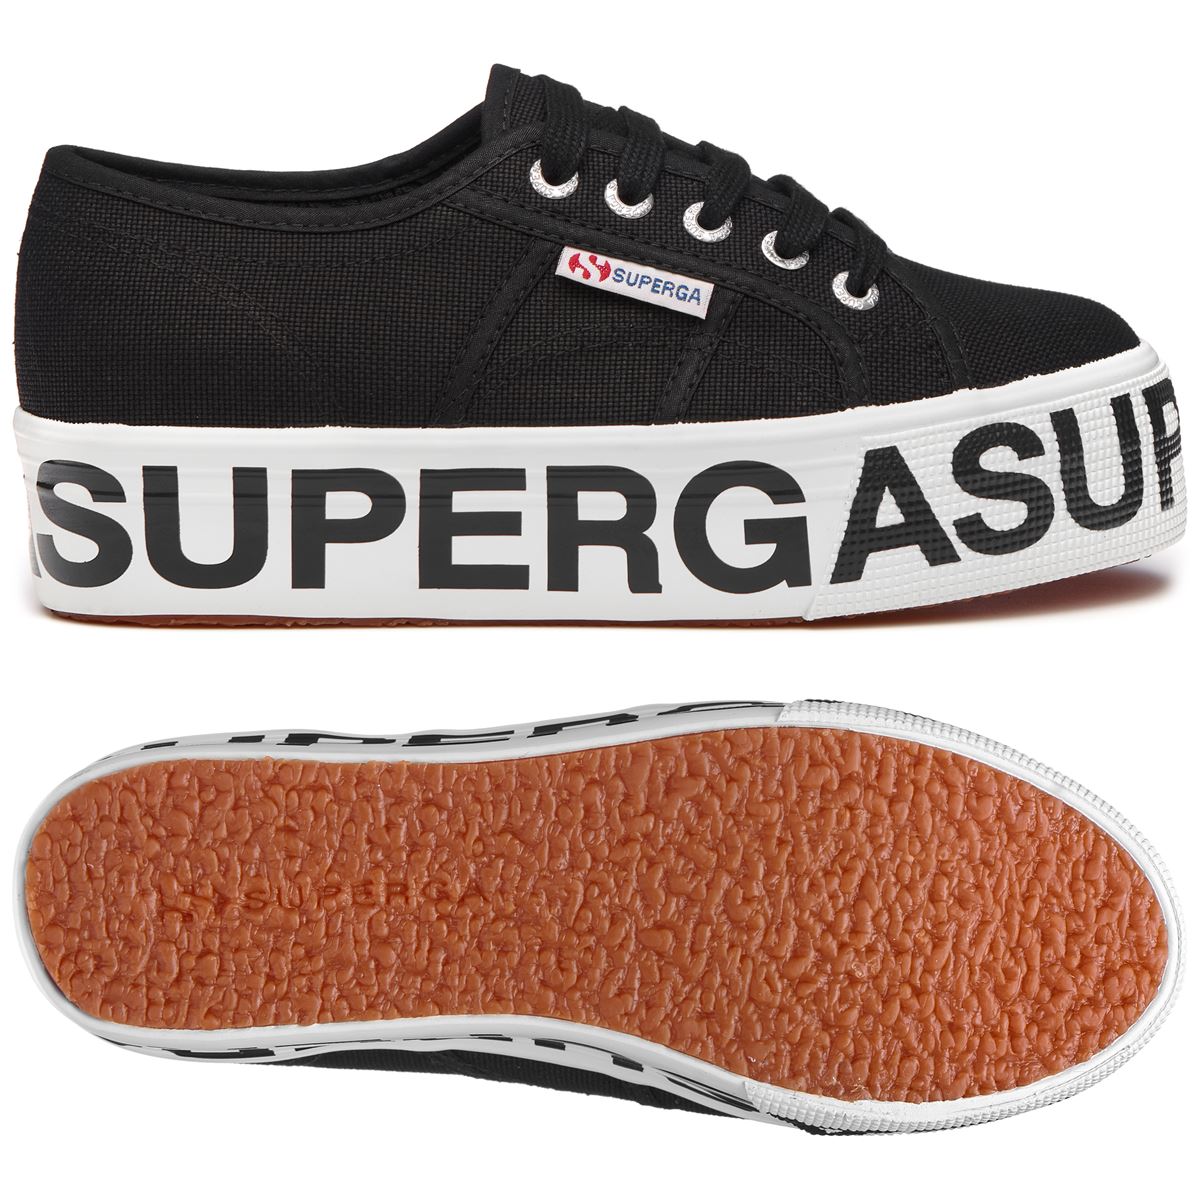 Superga sneakers cotw outsole lettering